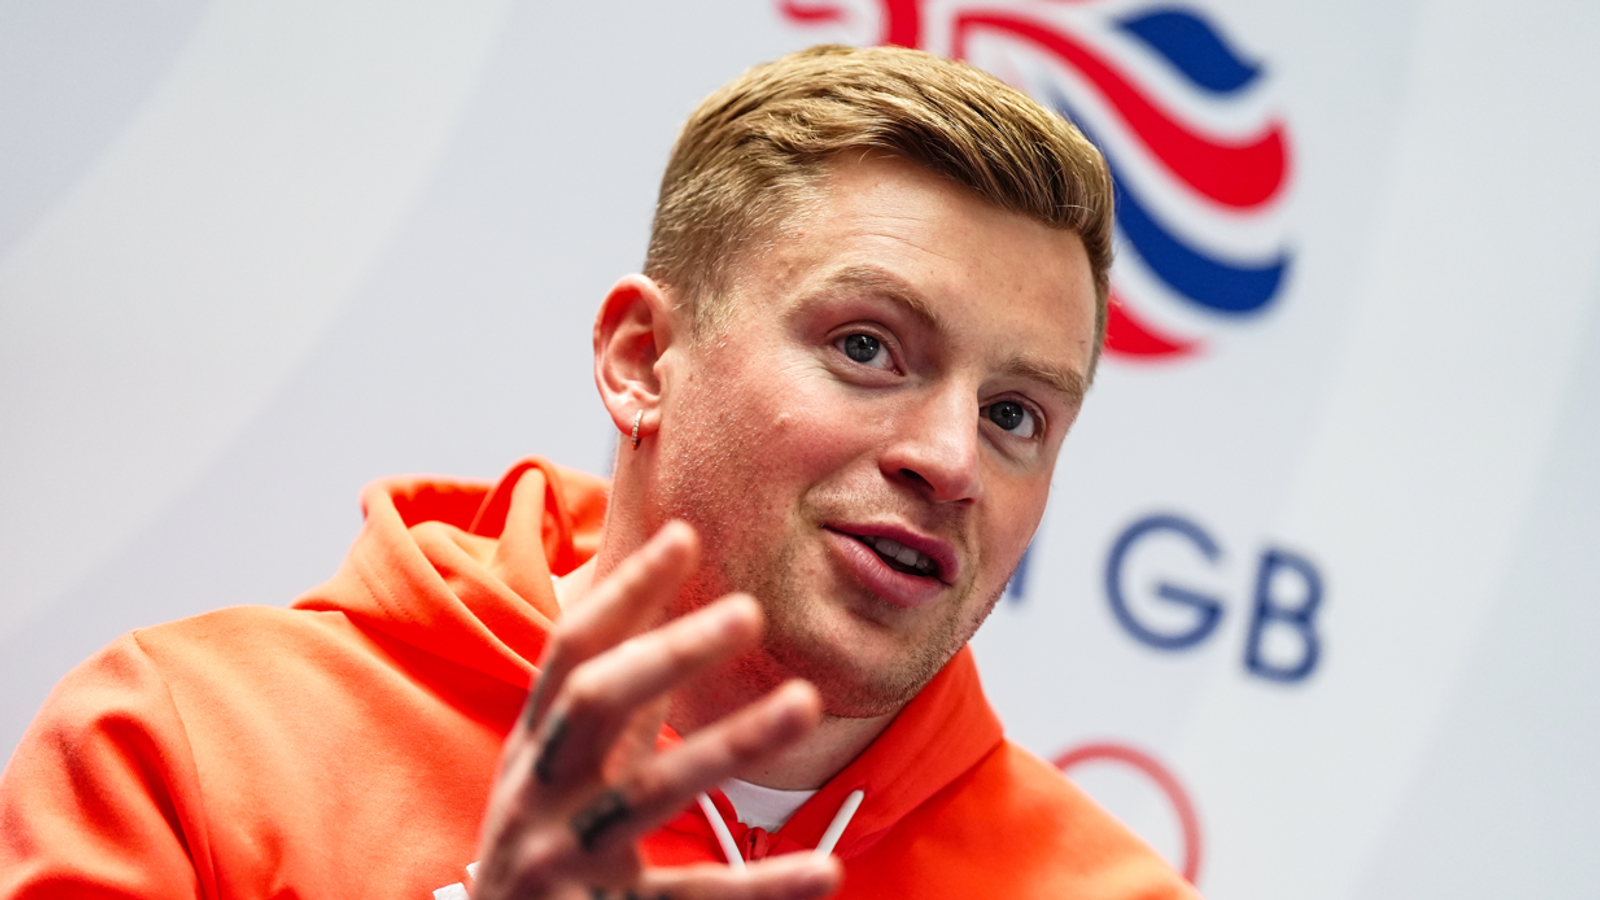 Paris 2024 Olympics: Adam Peaty believes new ‘peaceful’ approach will take pressure off in quest for gold | Olympics News